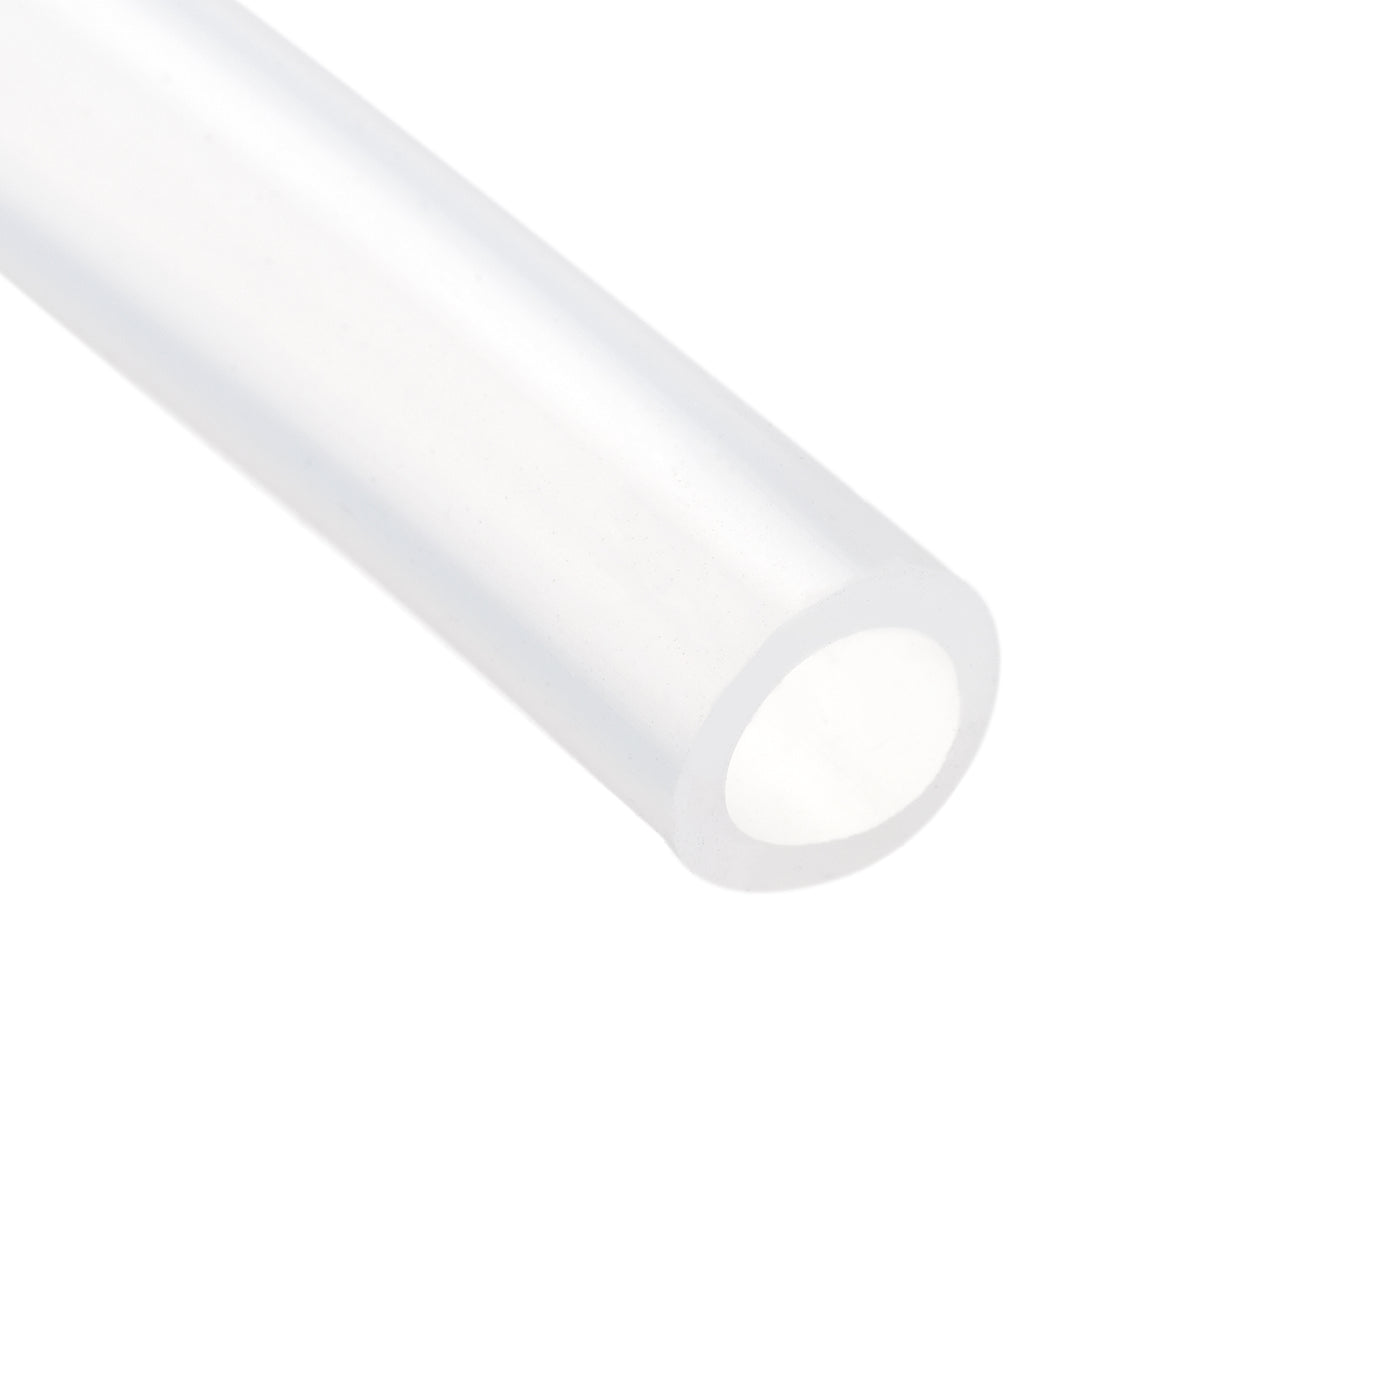 uxcell Uxcell Silicone Tubing 23/64" ID, 33/64" OD 1Pcs 0.33 Ft for Pump Transfer, Transparent